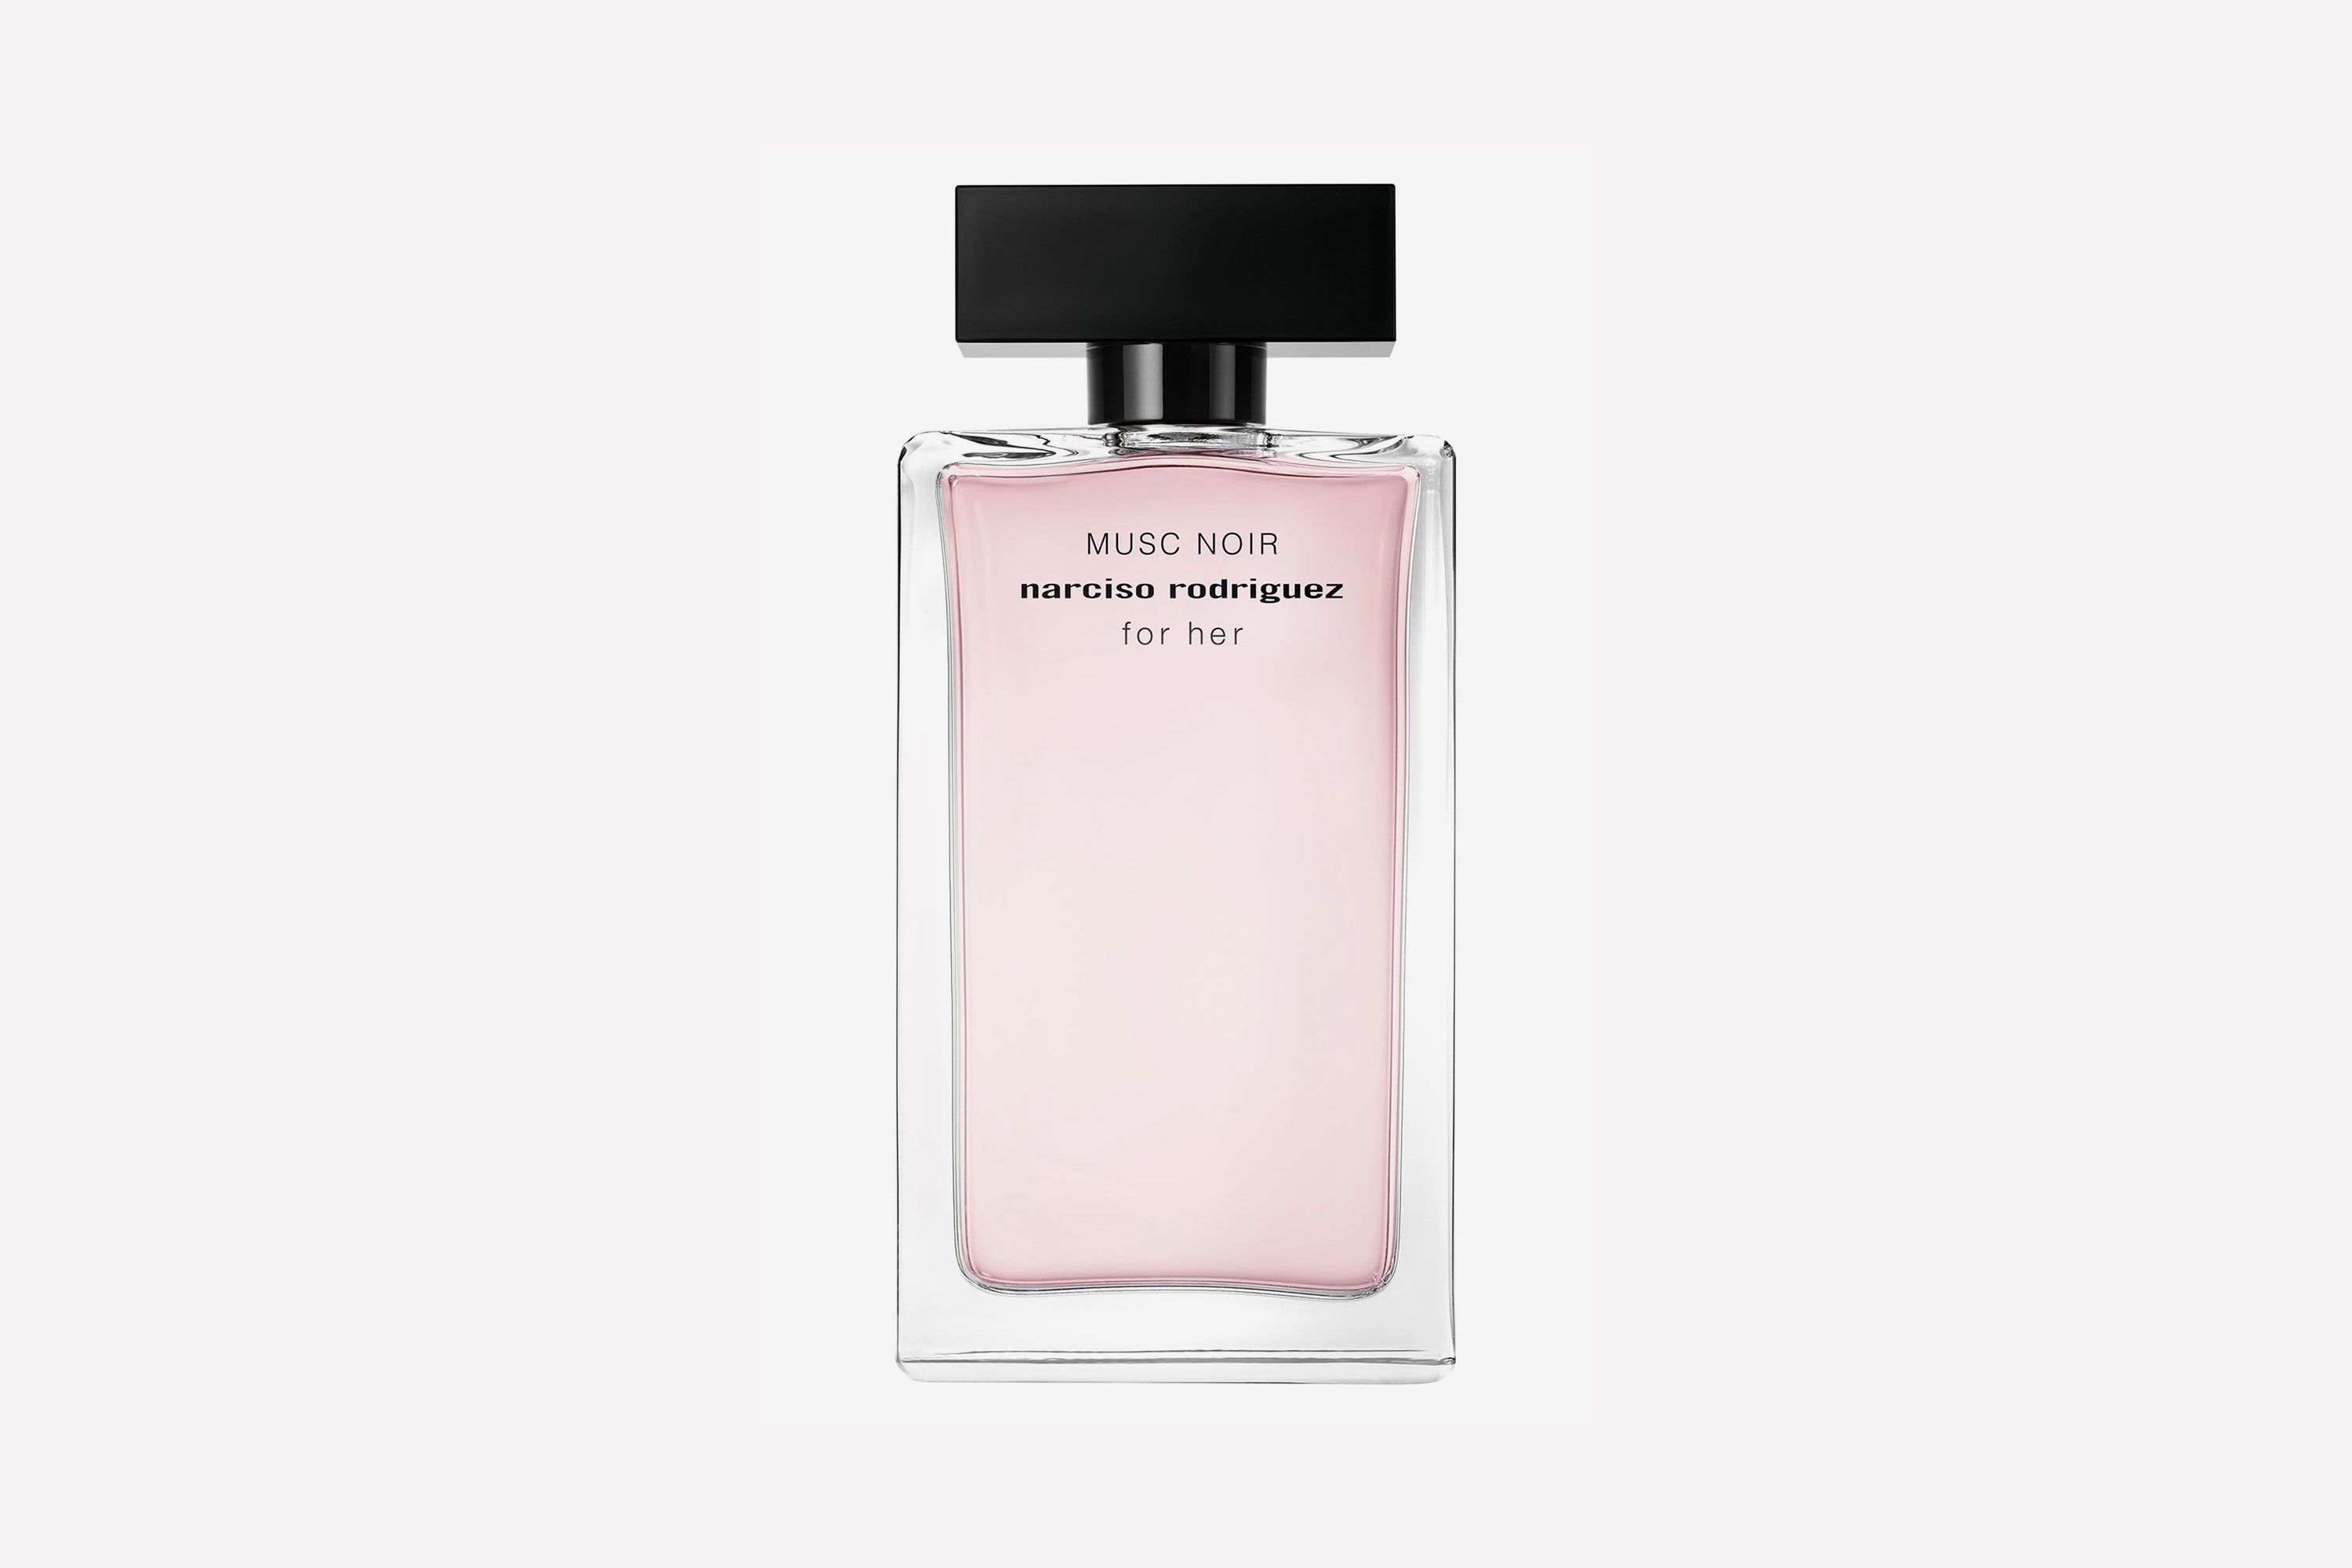 The 8 Best Spring Perfume Reviews 2021